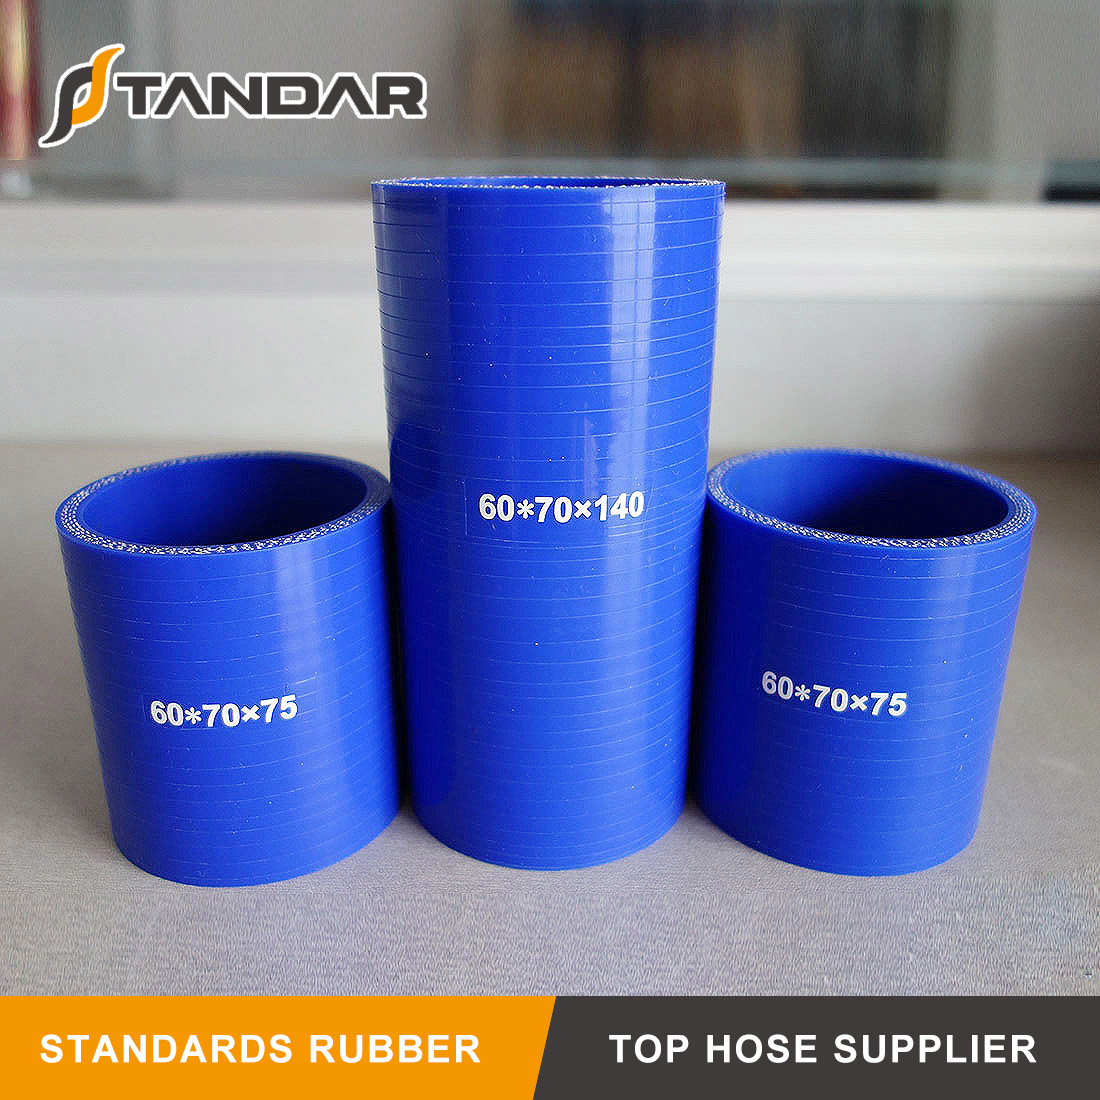 High Pressure Straight Coupler reinforced soft Silicone tubing